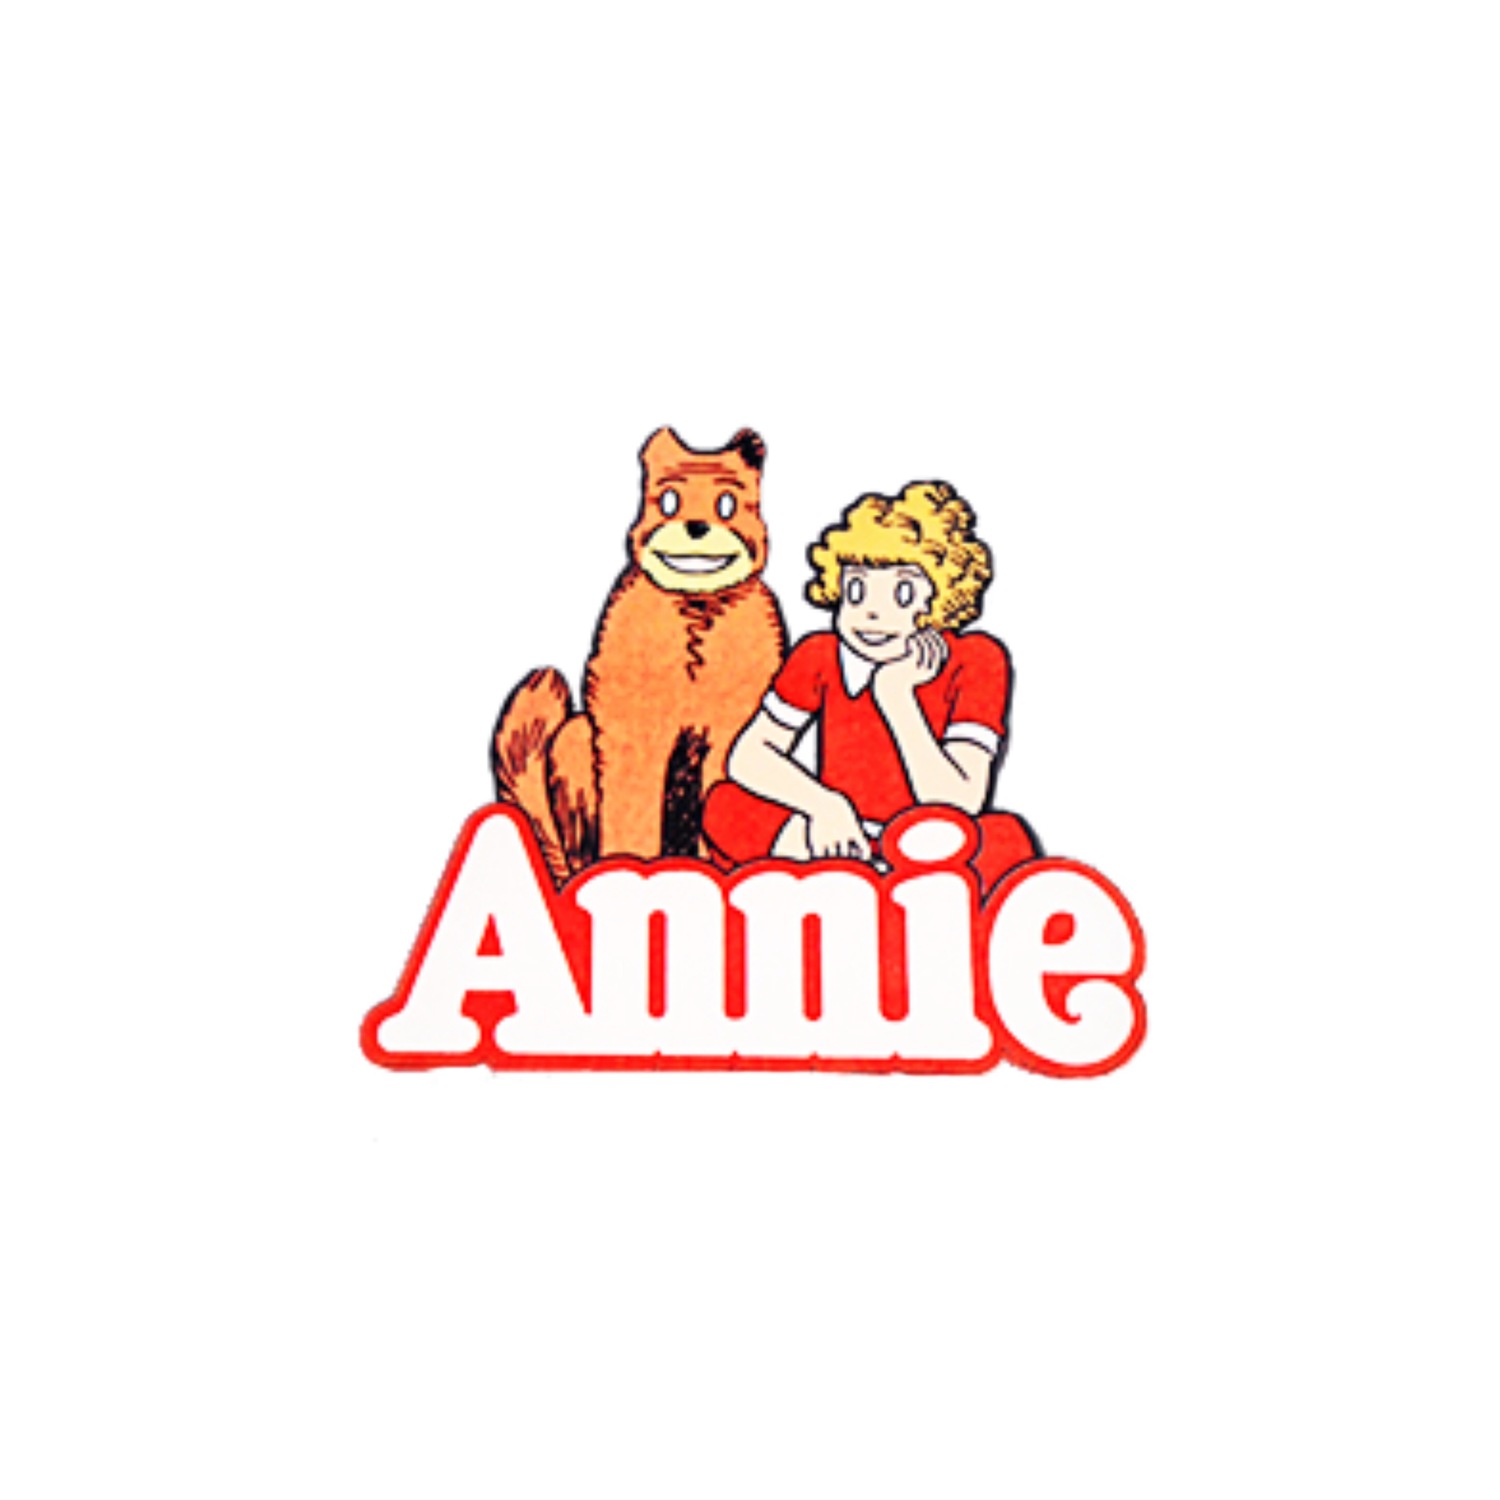 This is the Annie Logo.